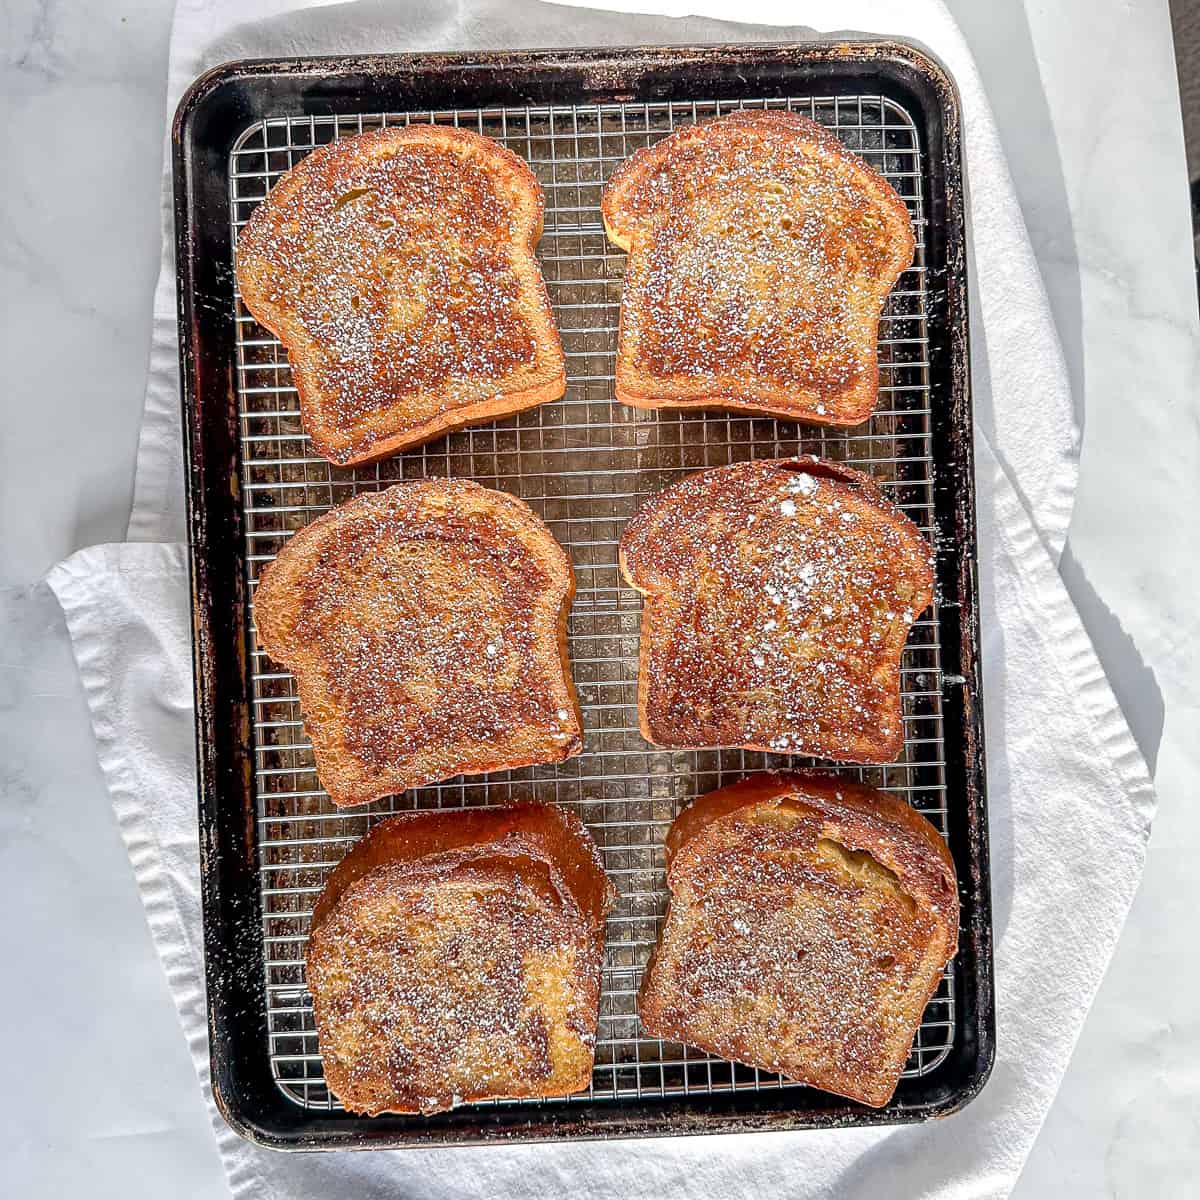 Six slices of French toast sprinkled with cinnamon powdered sugar.